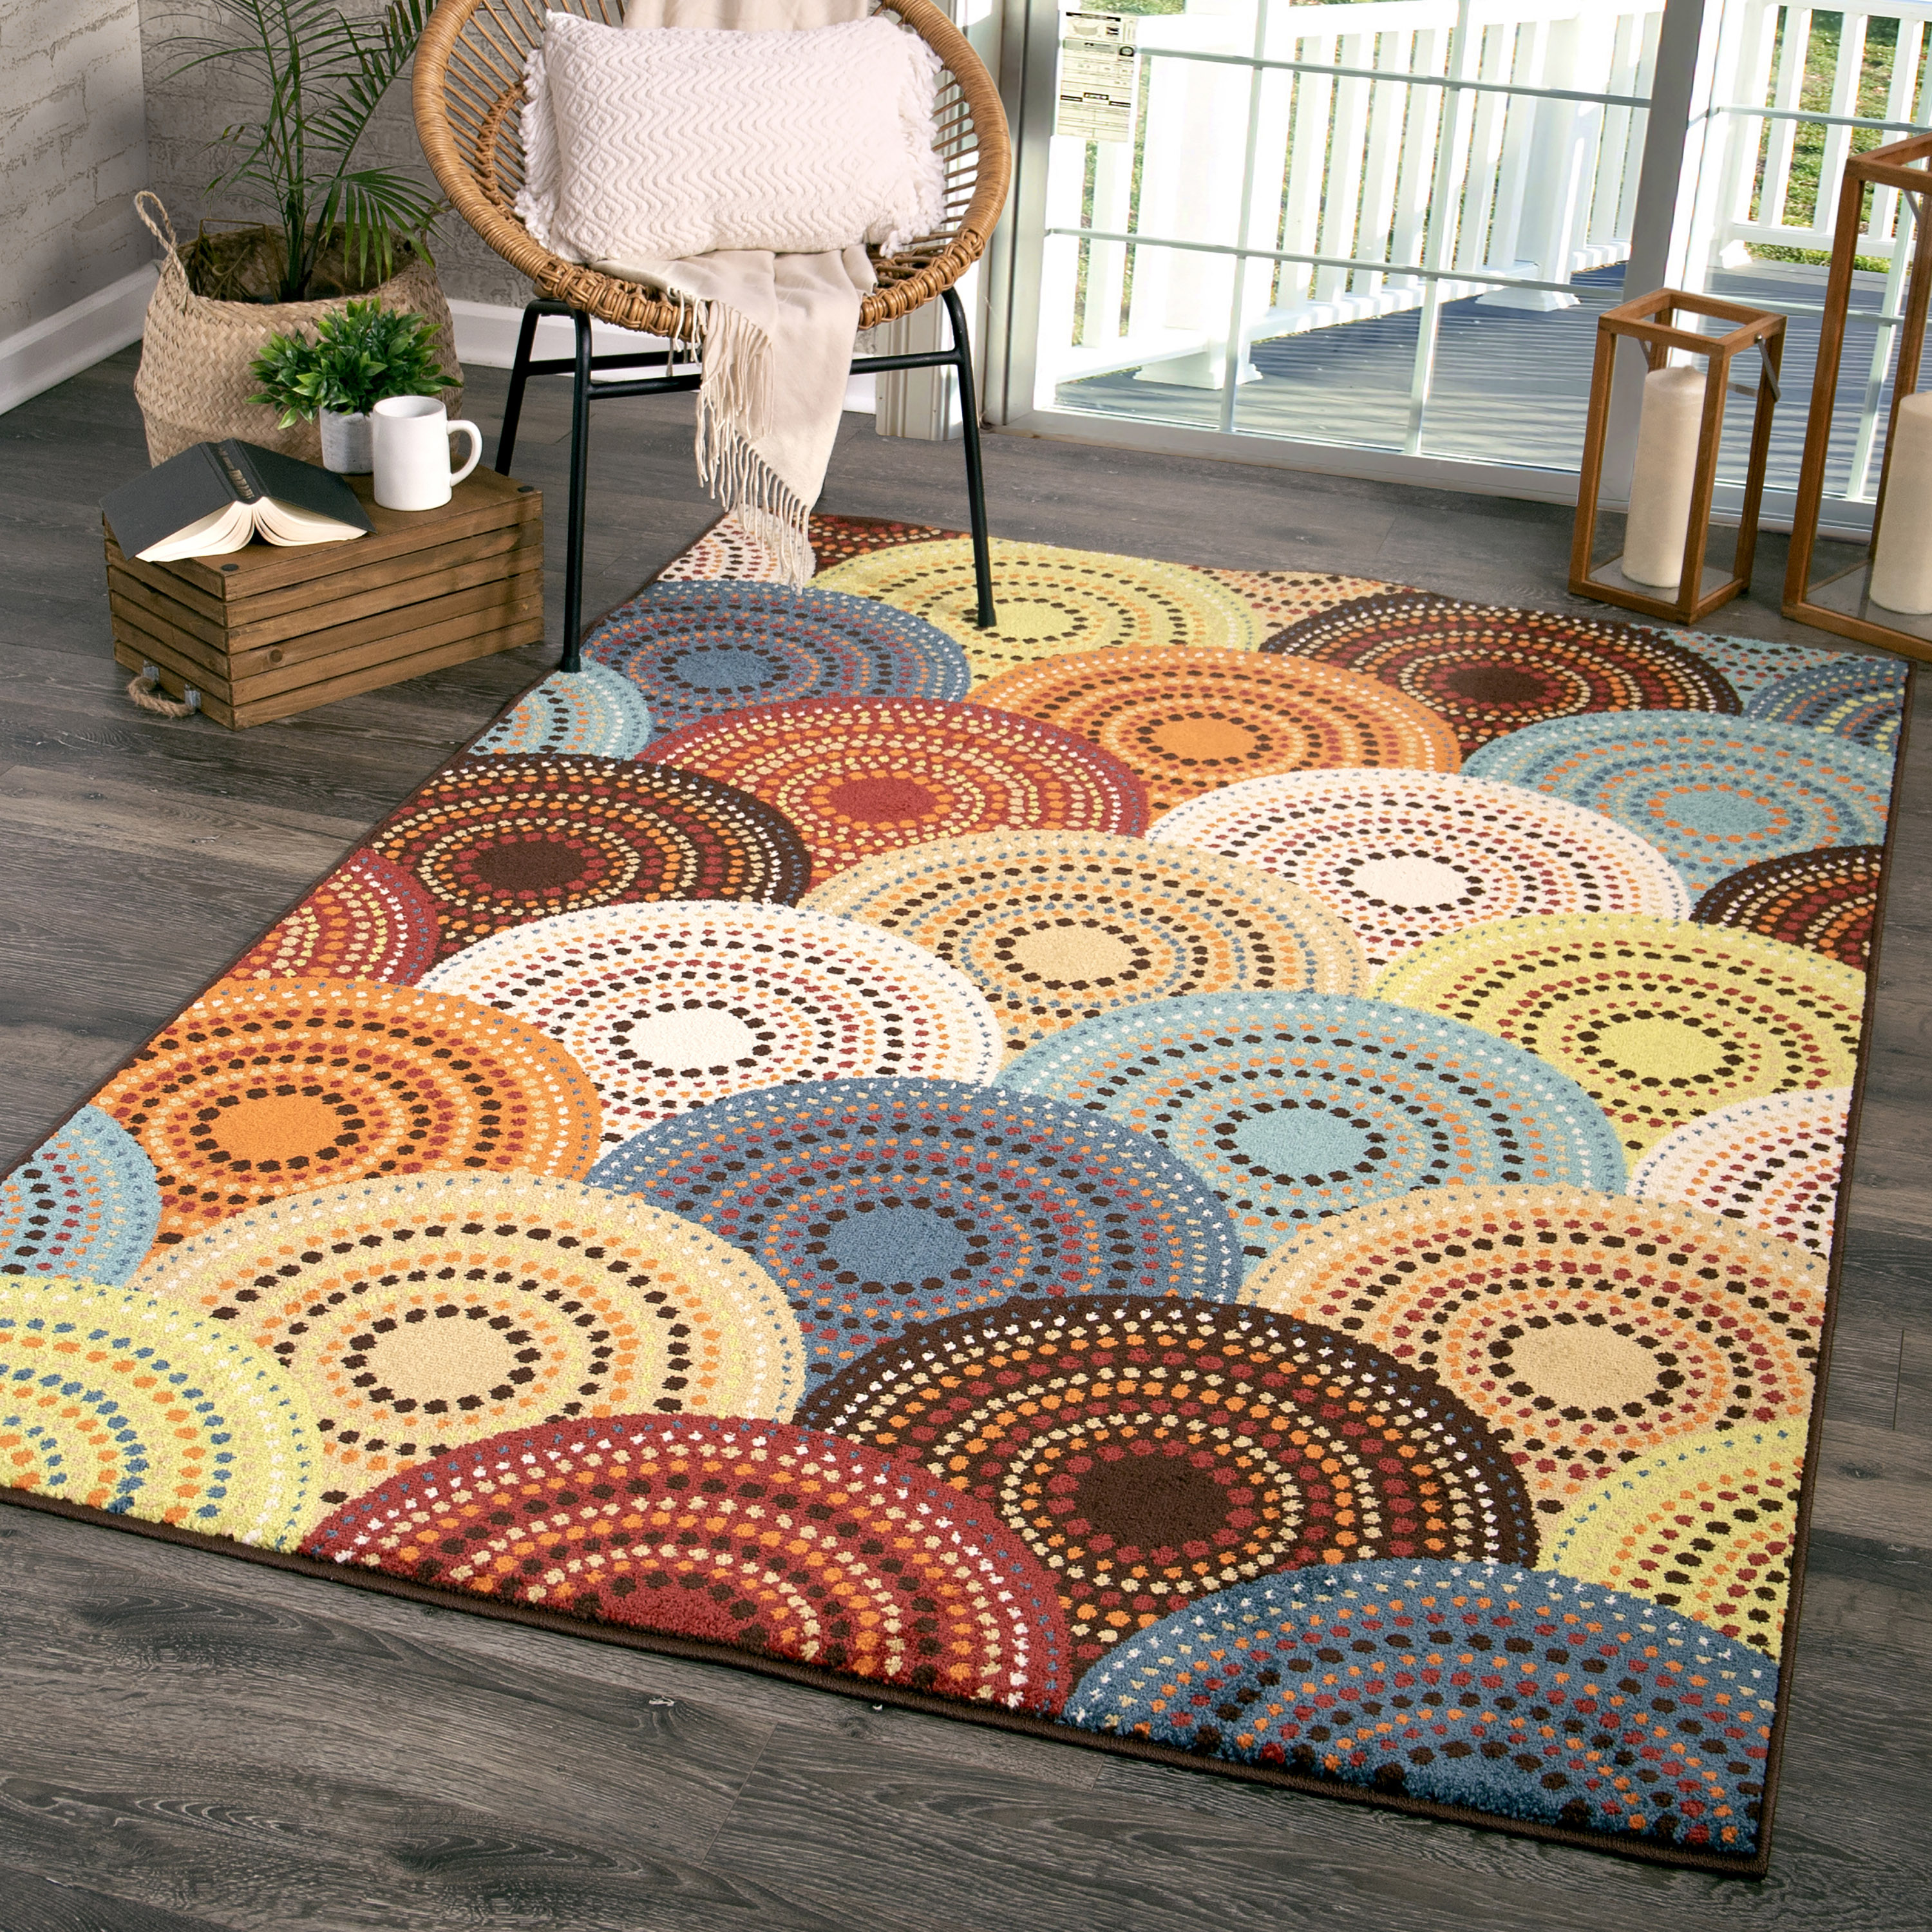 Better Homes & Gardens Bright Dotted Circles 5' X 7' Multi Area Rug - image 1 of 8